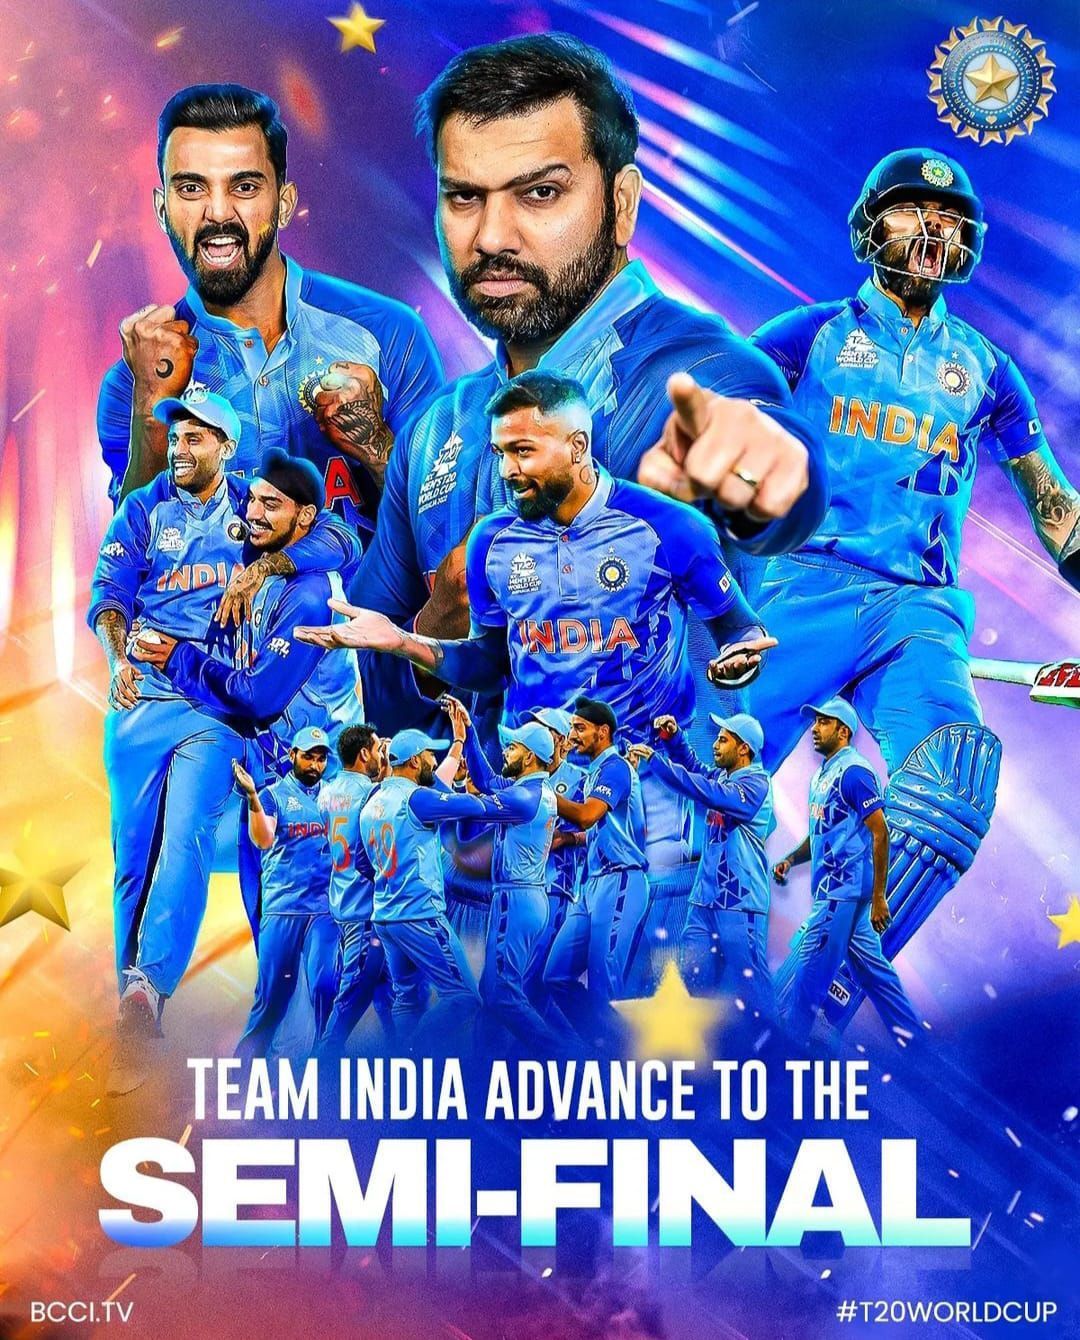 The Indian Team has entered the semi-finals of the ICC World T20. [Pic Credit - Indian Cricket Team]